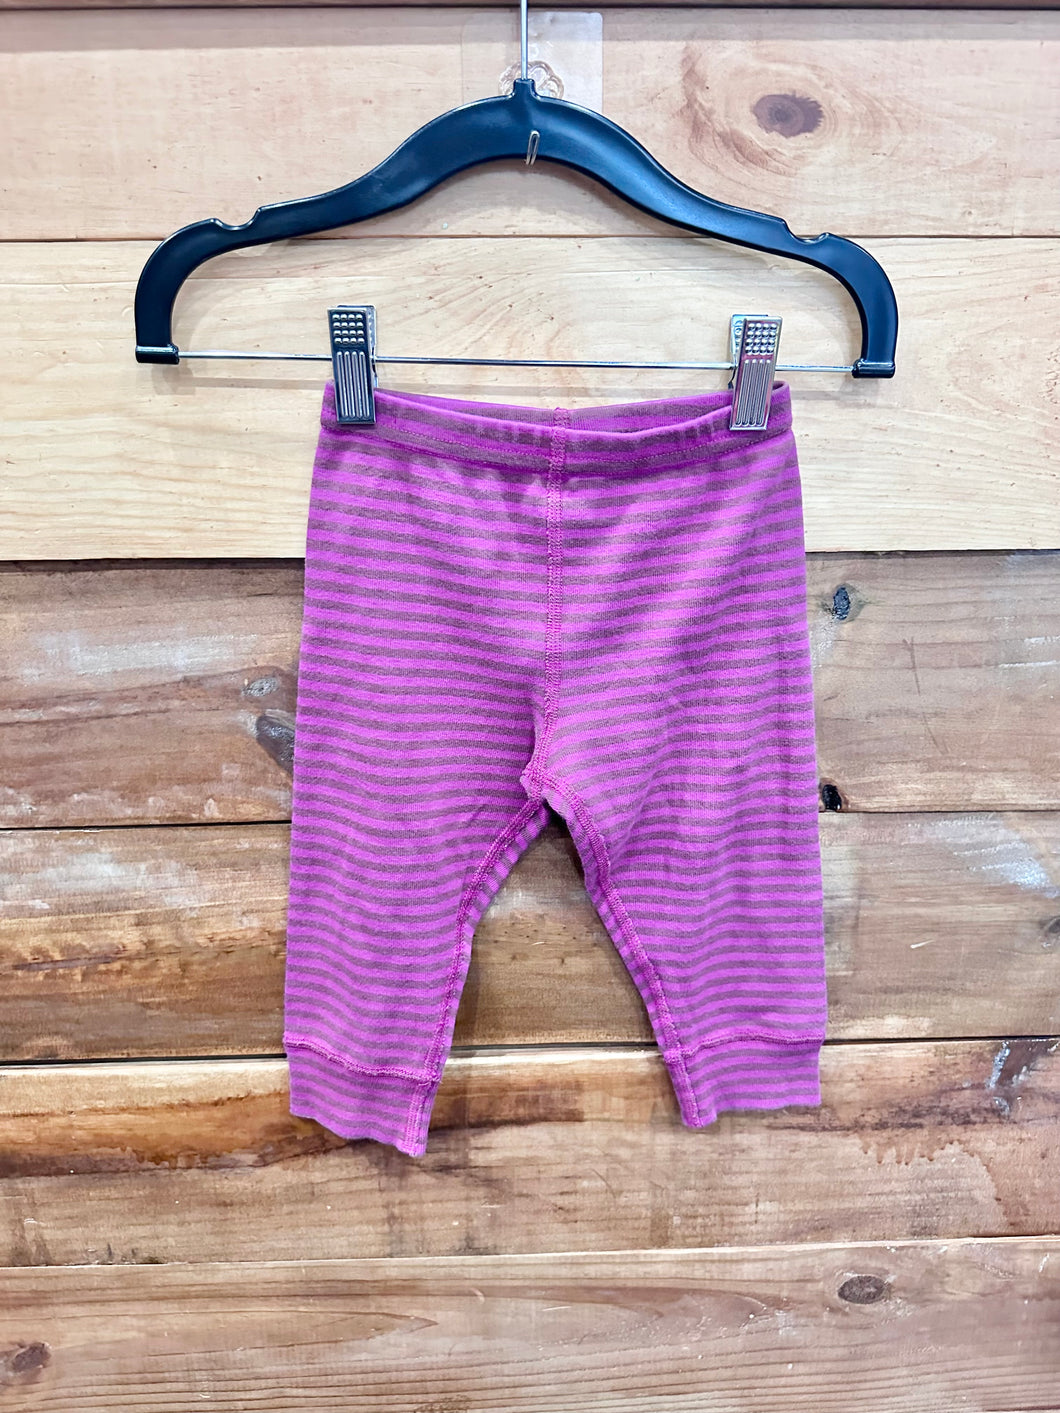 Hanna Andersson Striped Pants Size 18-24m